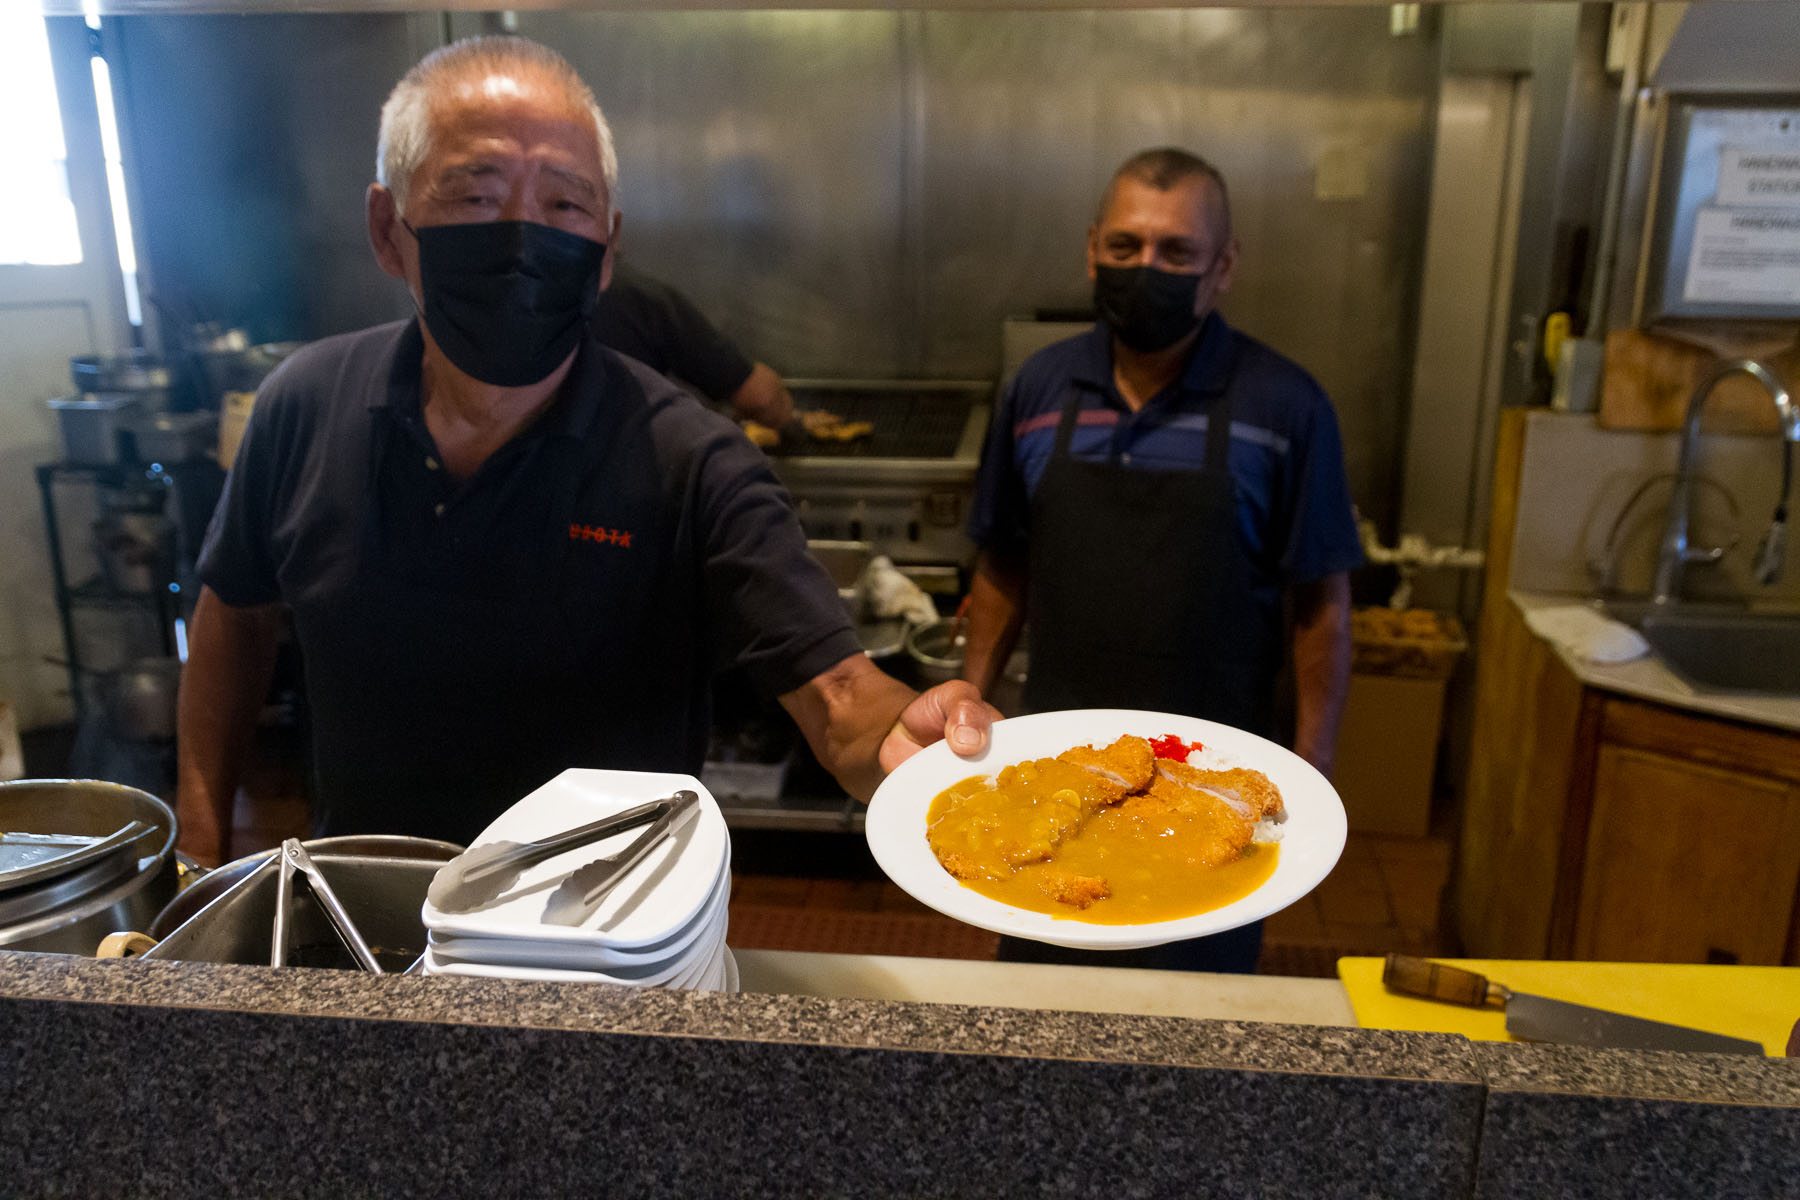 From inside a restaurant kitchen, a chef in a black uniform holds out a plate of katsu curry.